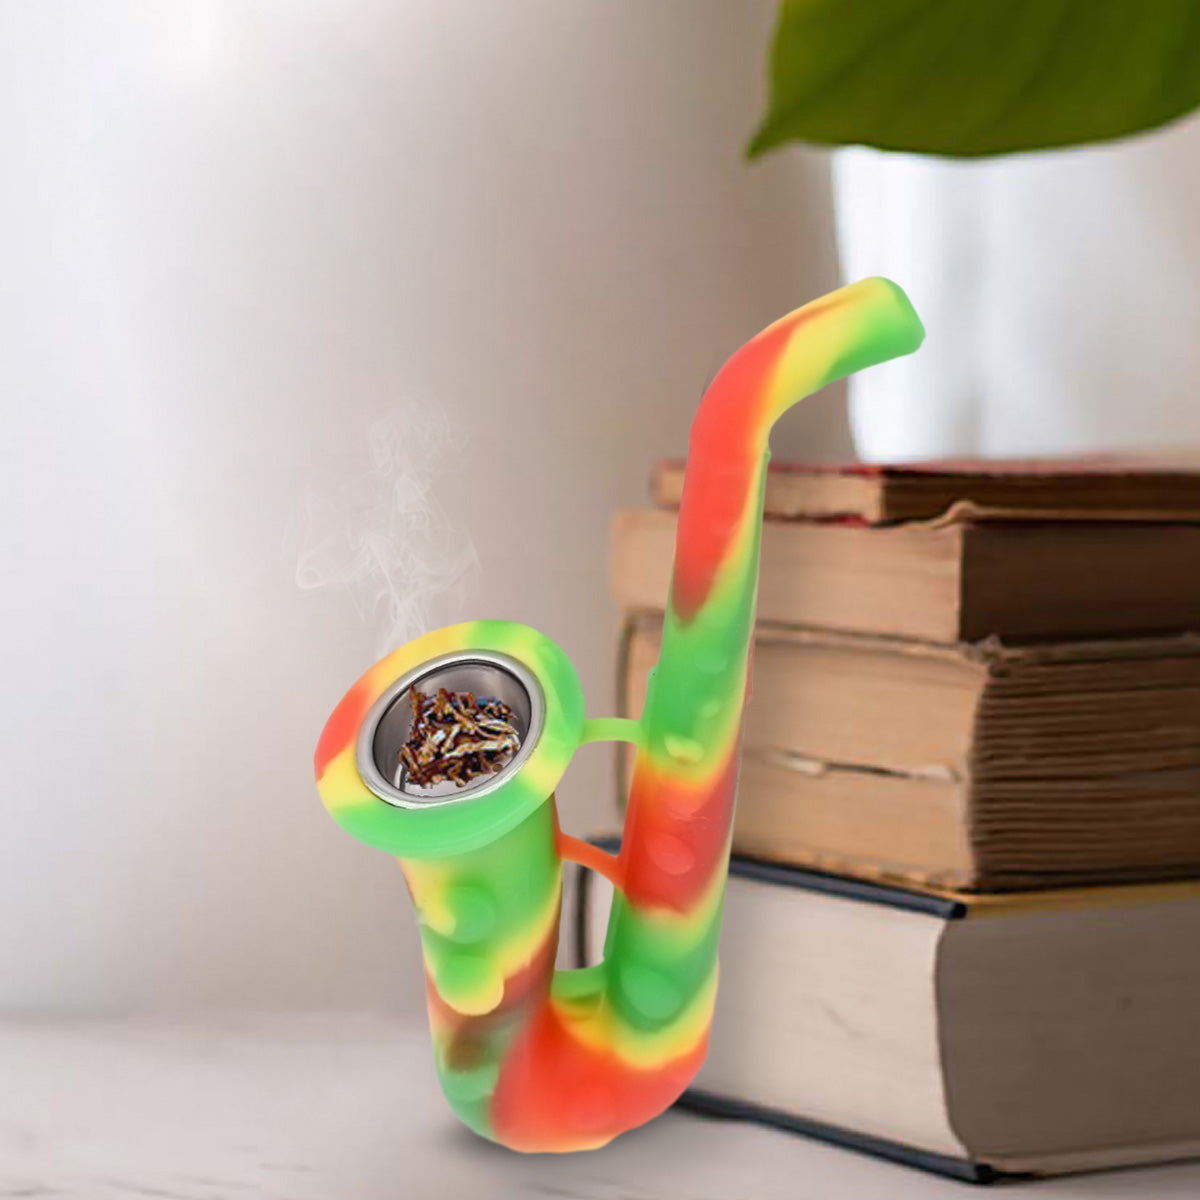 Kookee Silicone Unbreakable Saxophone Smoking Pipe, Tobacco Pipes with Steel Bowl, Red and Green